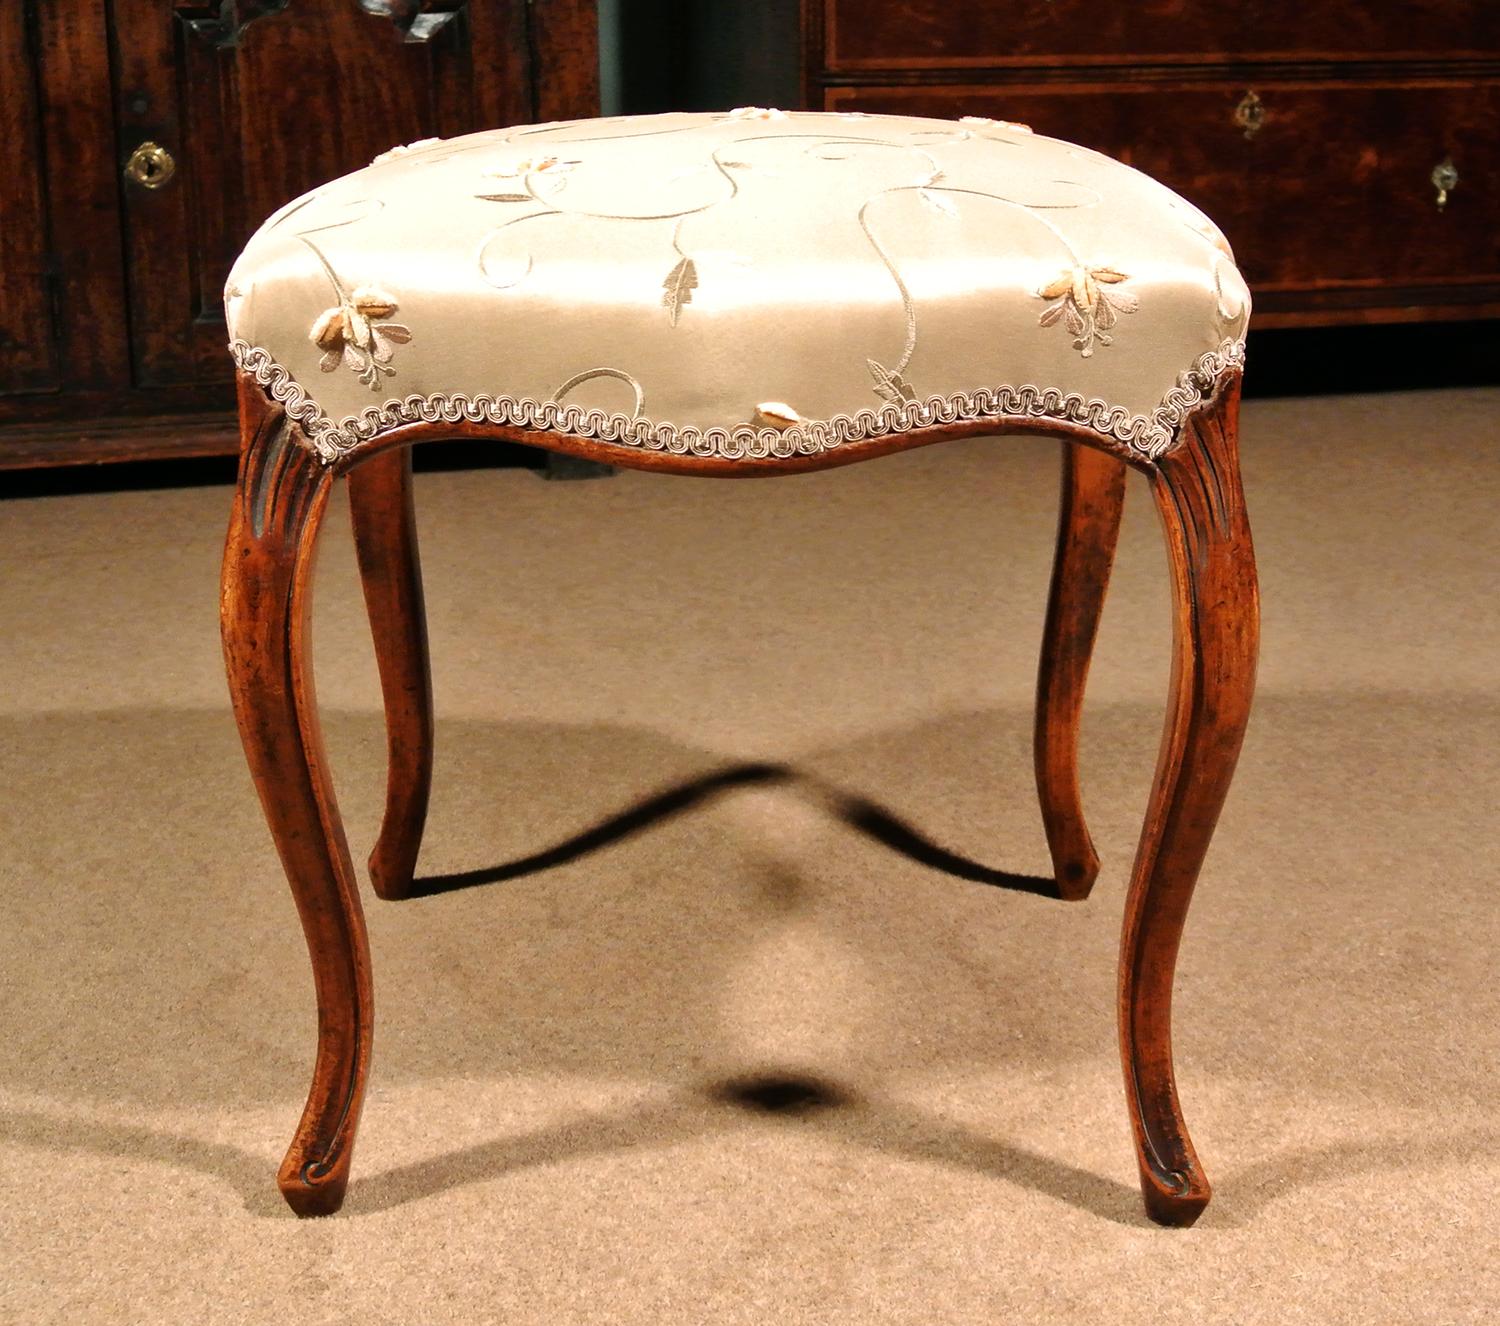 Of excellent colour and condition, a very elegant 19th century solid walnut stool.

Beautiful solid serpentine walnut seat rails and long cabriole legs with rolled channel carved borders and scrolled peg toes in the French manner.

The legs carved